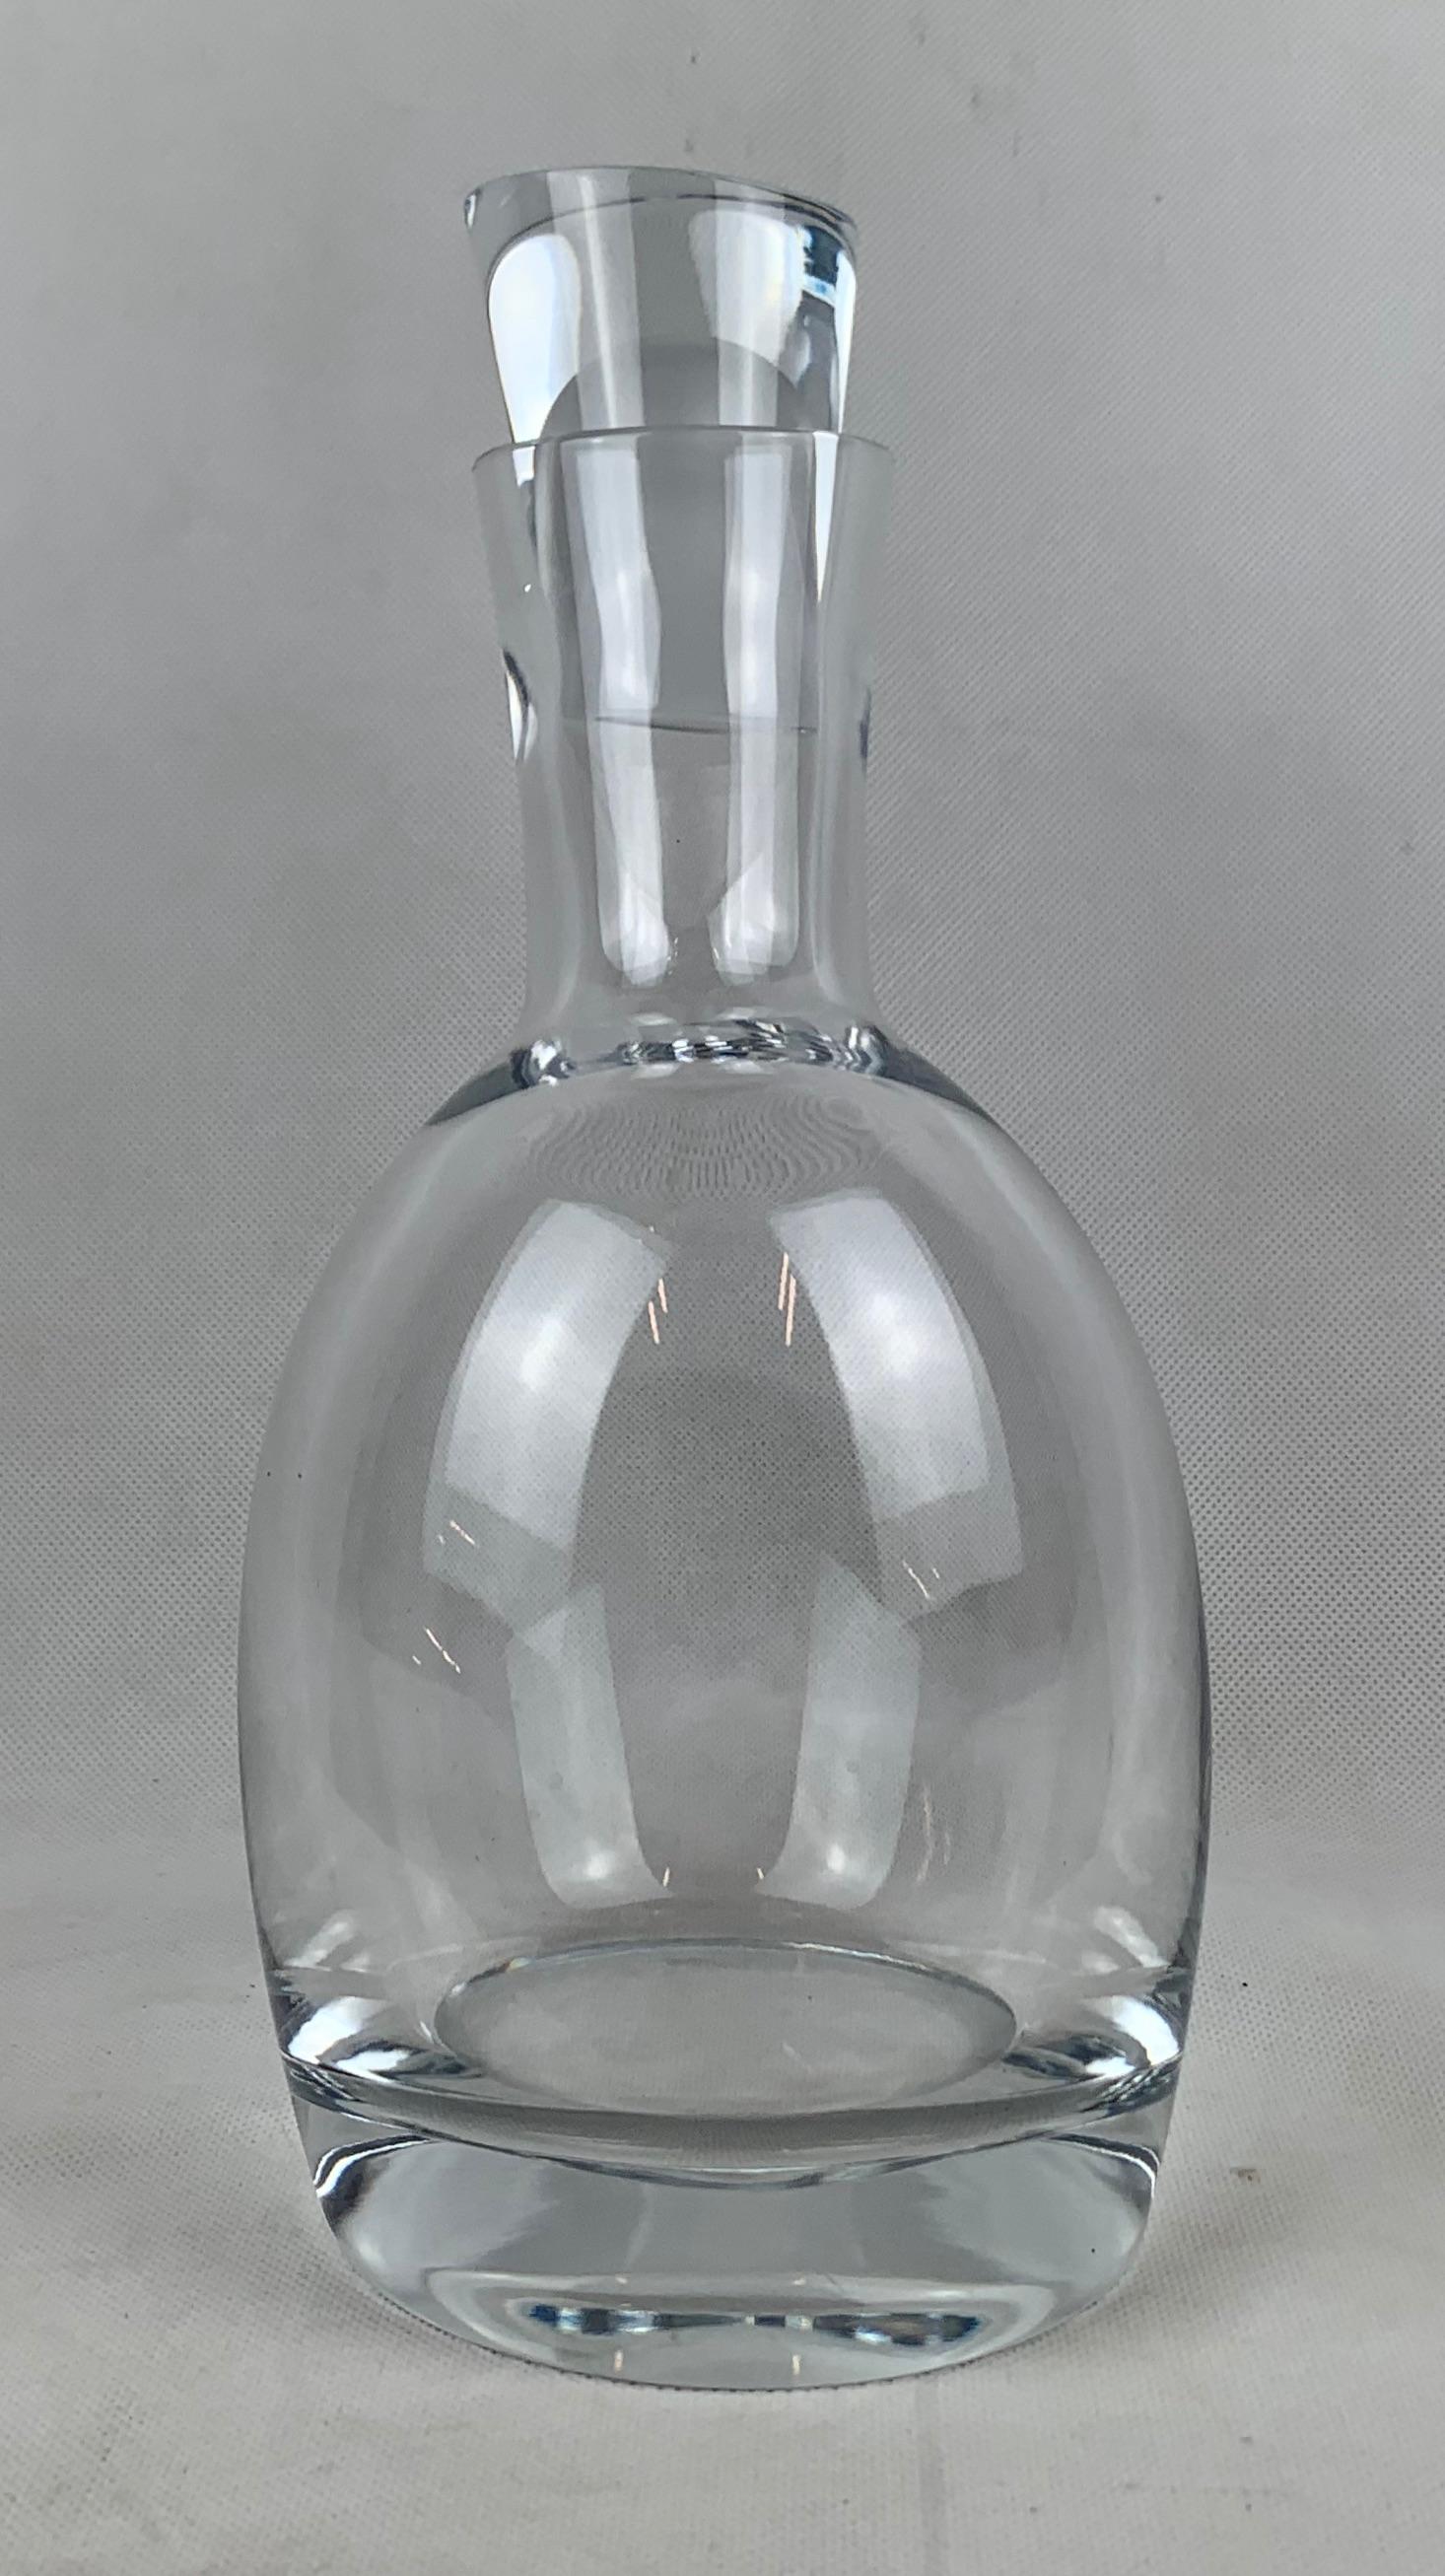 Nambé clear crystal spirits decanter. Twentieth century assymetrical design. The design is unusual but very stable due to the thick counter weighted base. The stopper itself is a marvel made from heavy thick glass, but fits snugly into the decanter